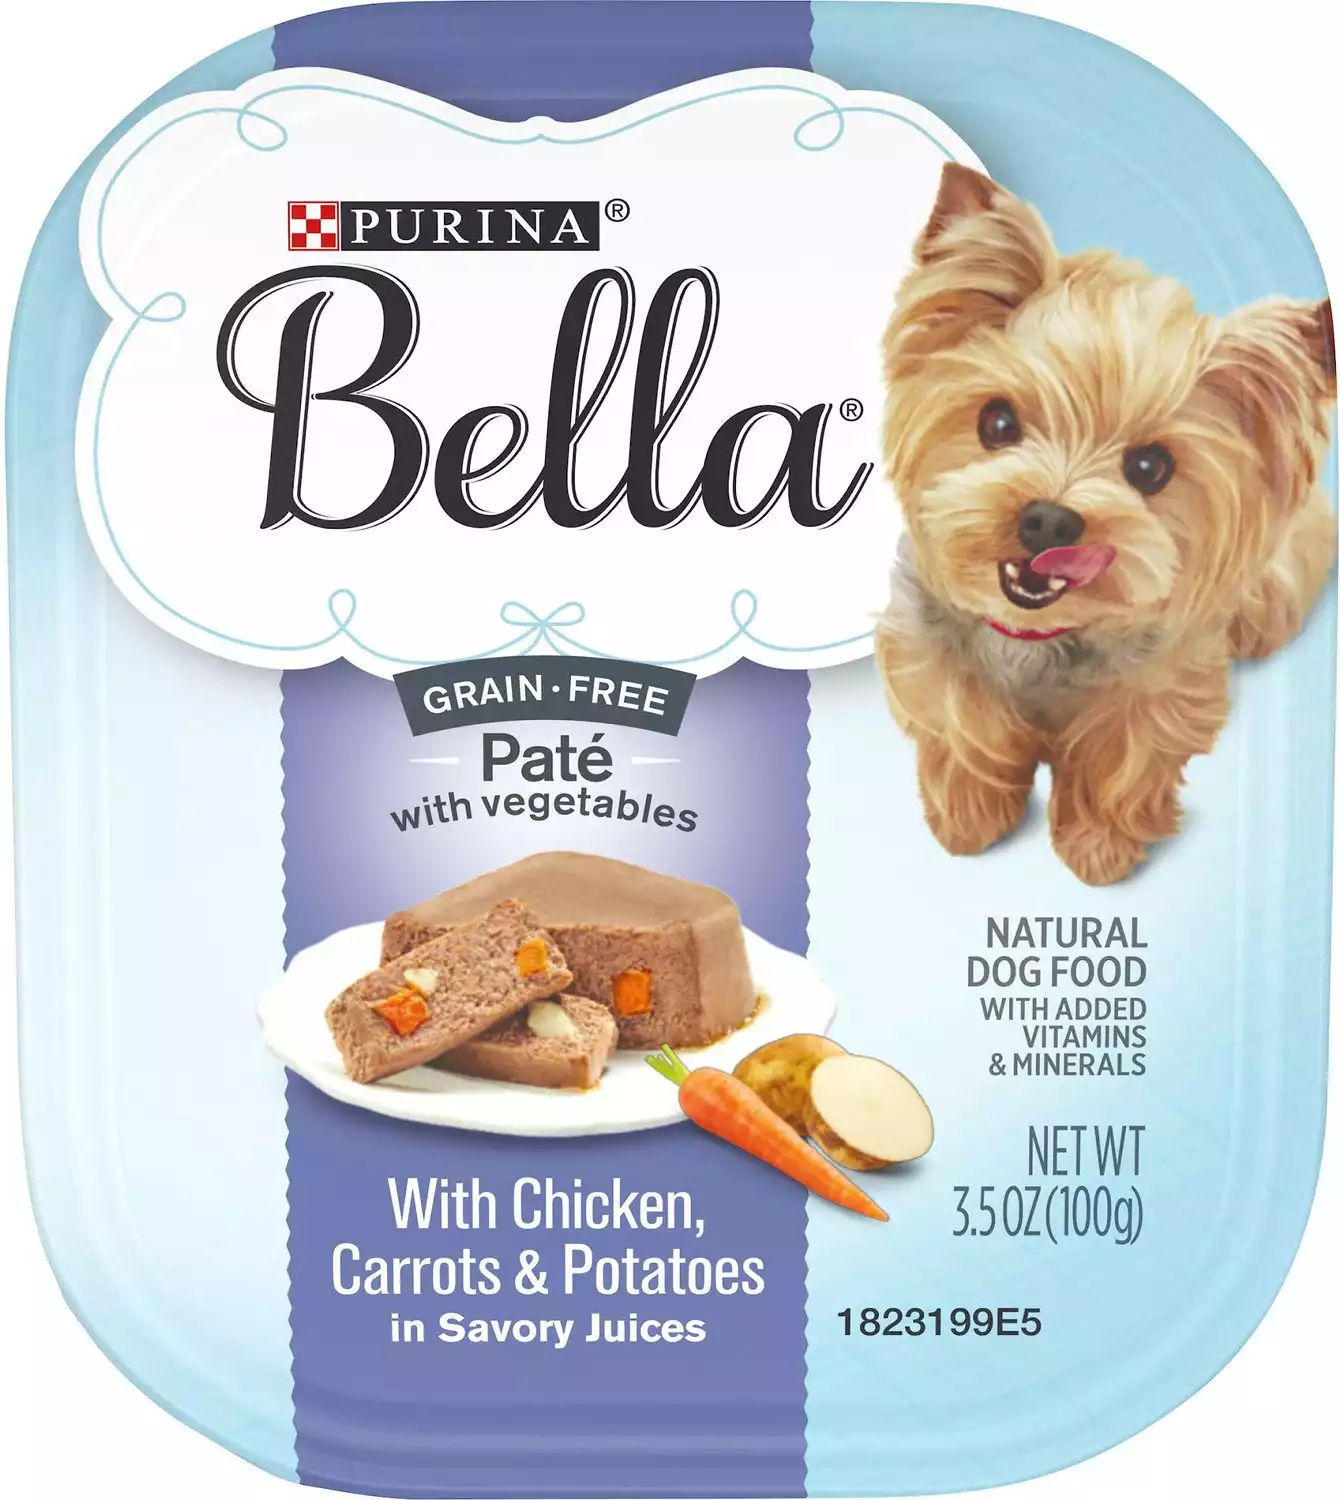 Purina Bella Grain-free Small Breed Wet Food With Chicken, Carrots, & Potatoes